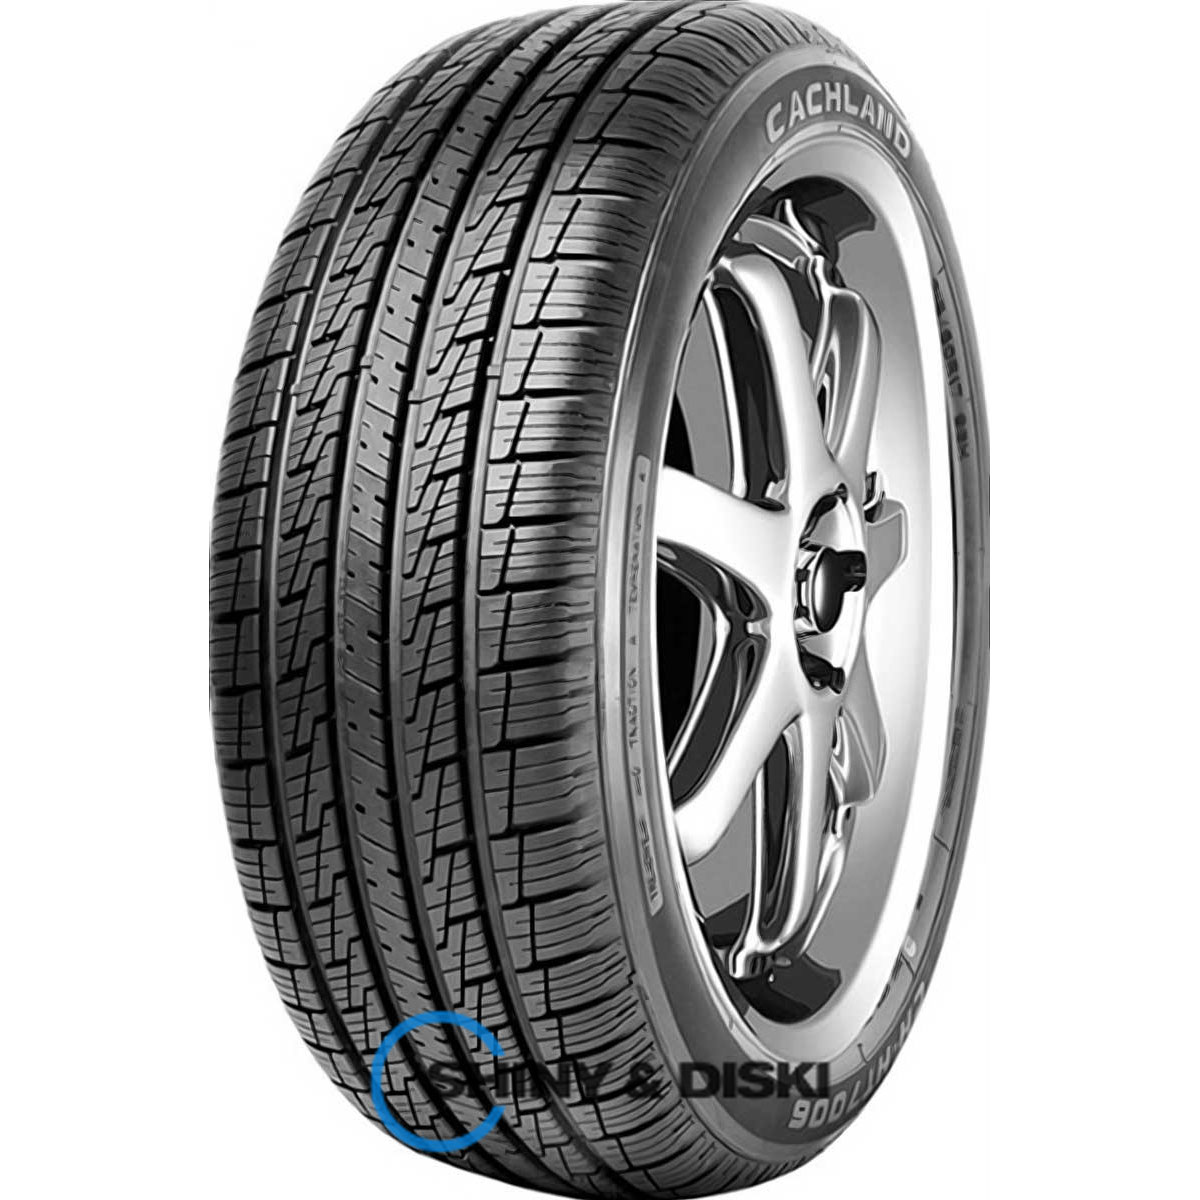 cachland ch-ht7006 265/70 r16 112h